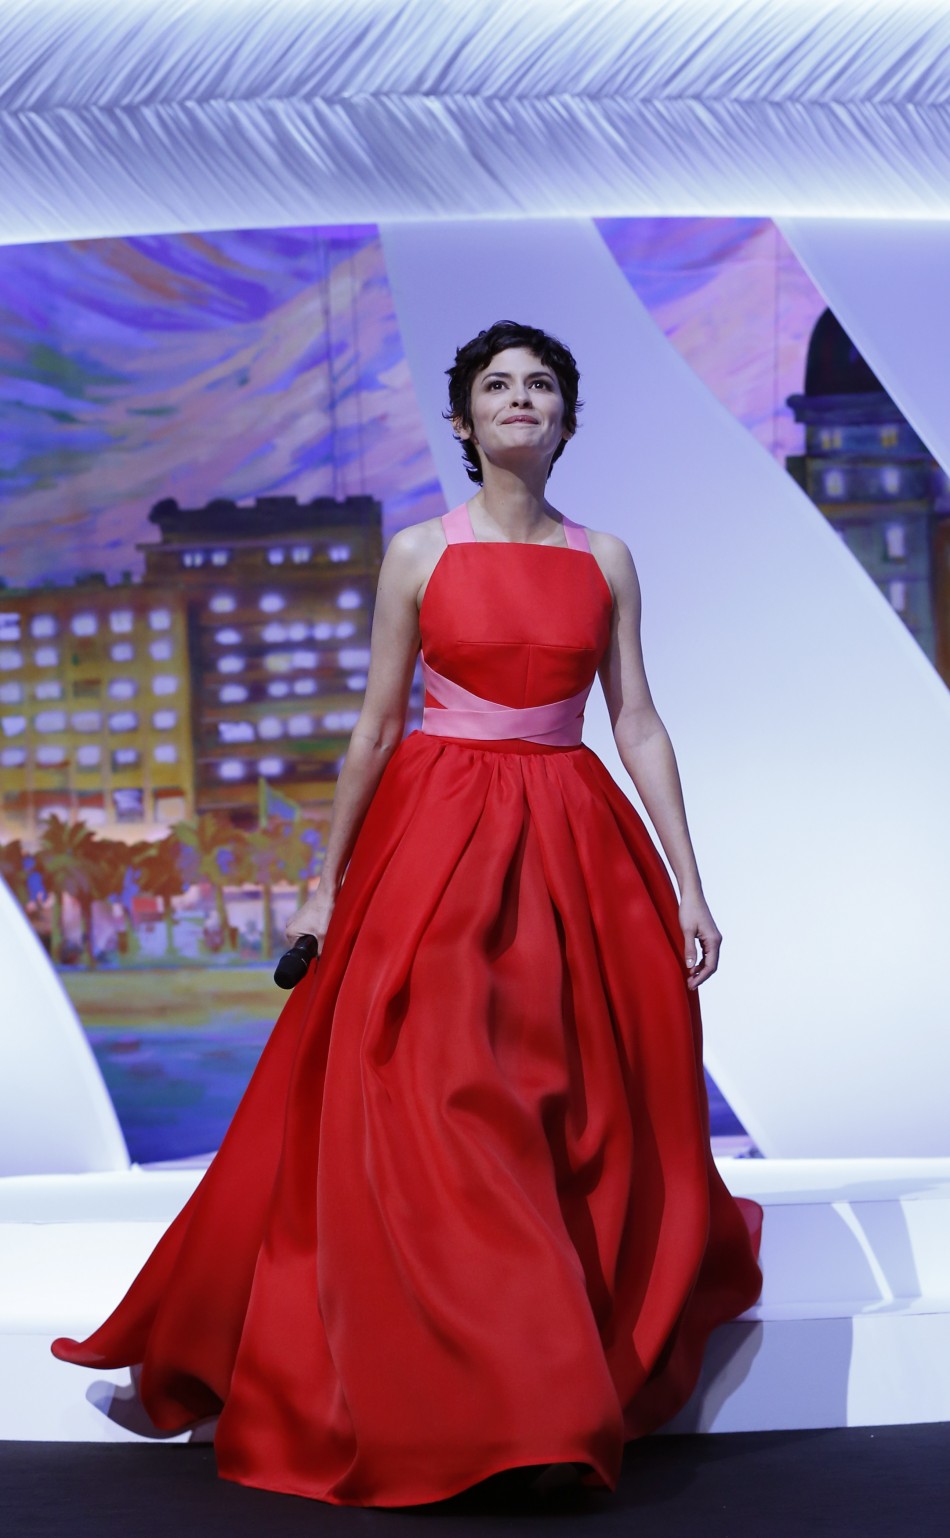 Mistress of Ceremony actress Audrey Tautou arrives on stage during the closing ceremony of the 66th Cannes Film Festival in Cannes May 26, 2013.